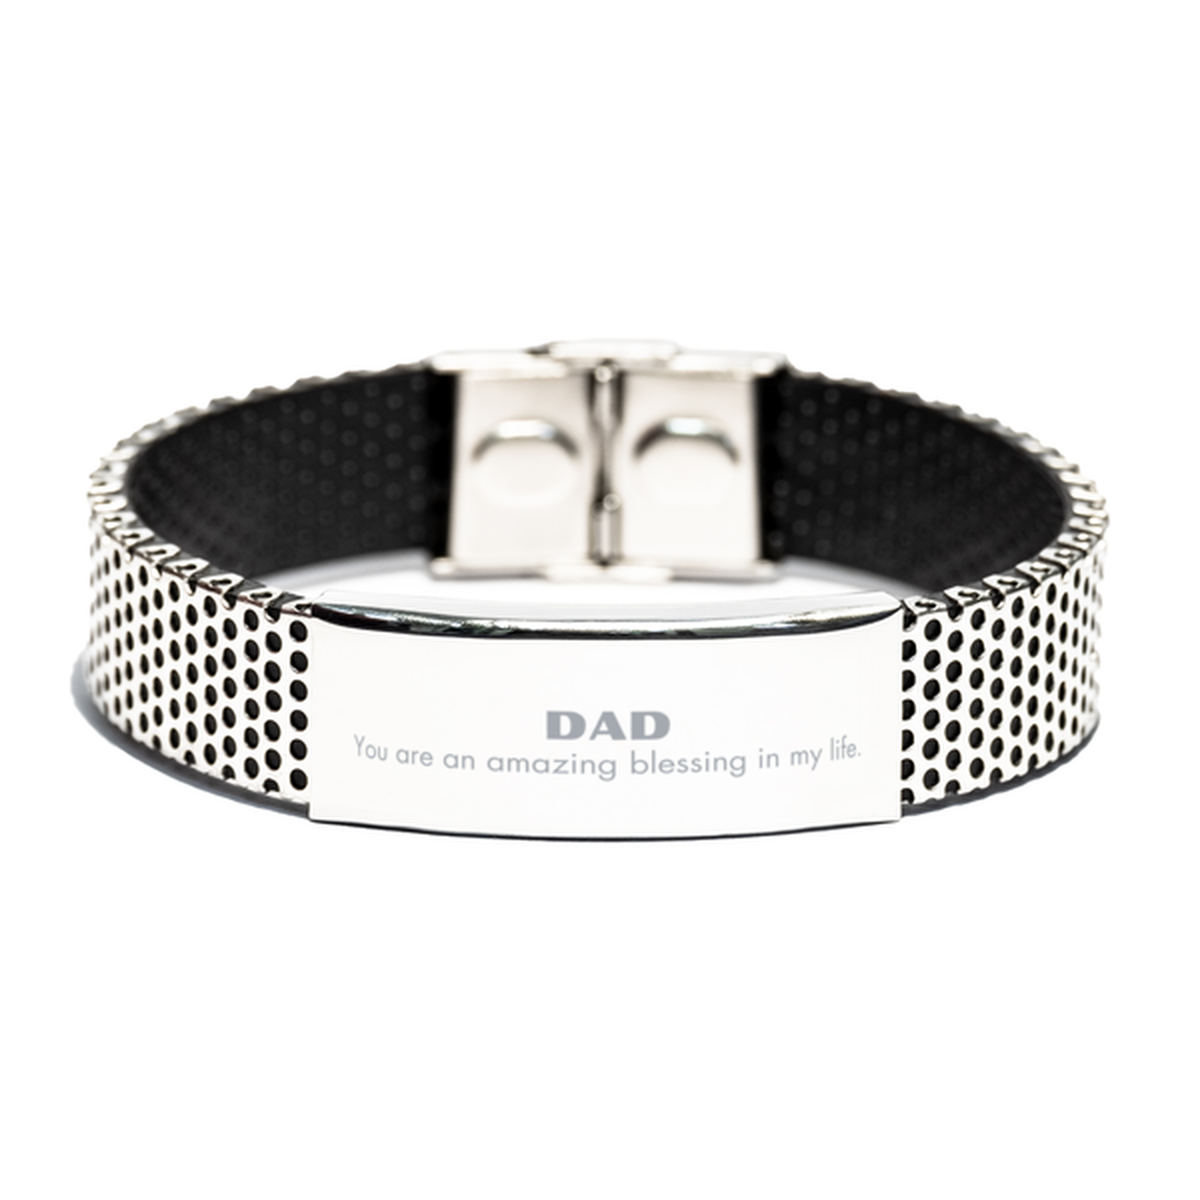 Dad Stainless Steel Bracelet, You are an amazing blessing in my life, Thank You Gifts For Dad, Inspirational Birthday Christmas Unique Gifts For Dad